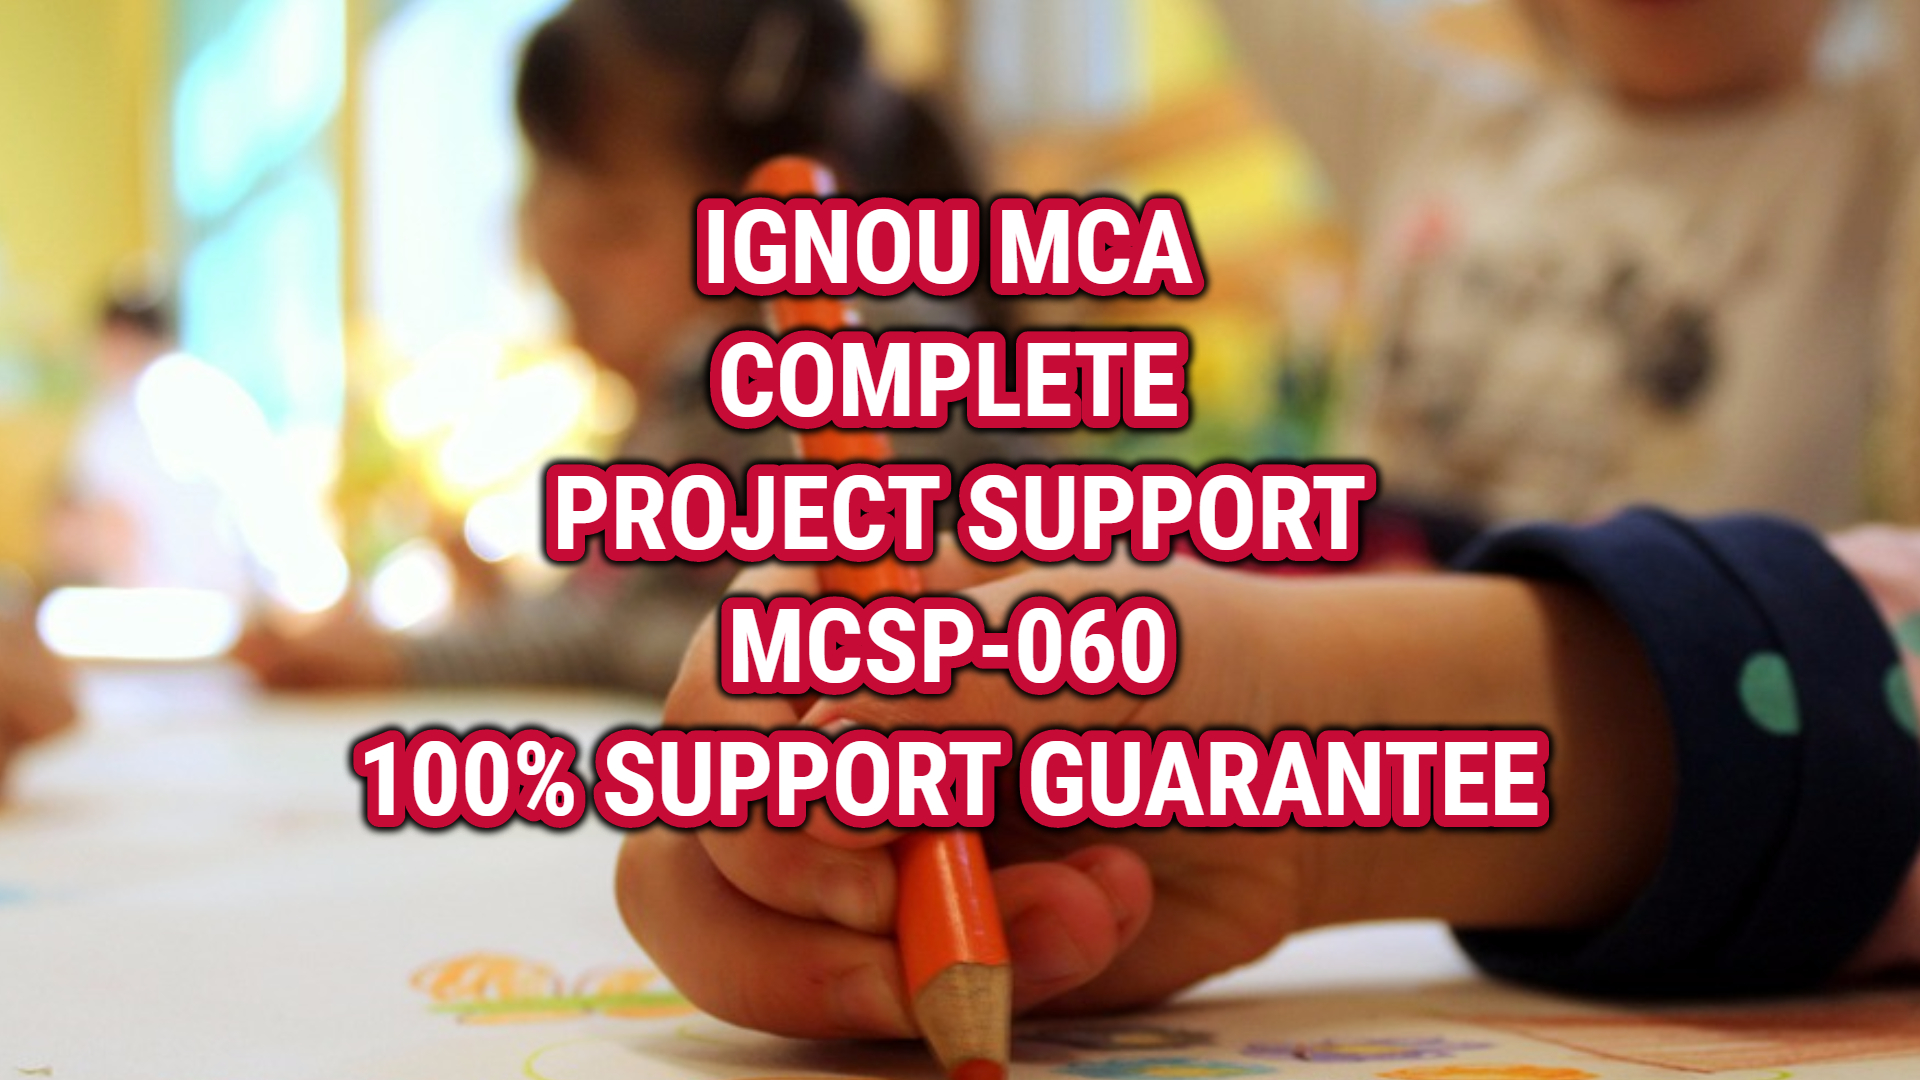 IGNOU MCA PROJECT COMPLETE SUPPORT - MCSP060